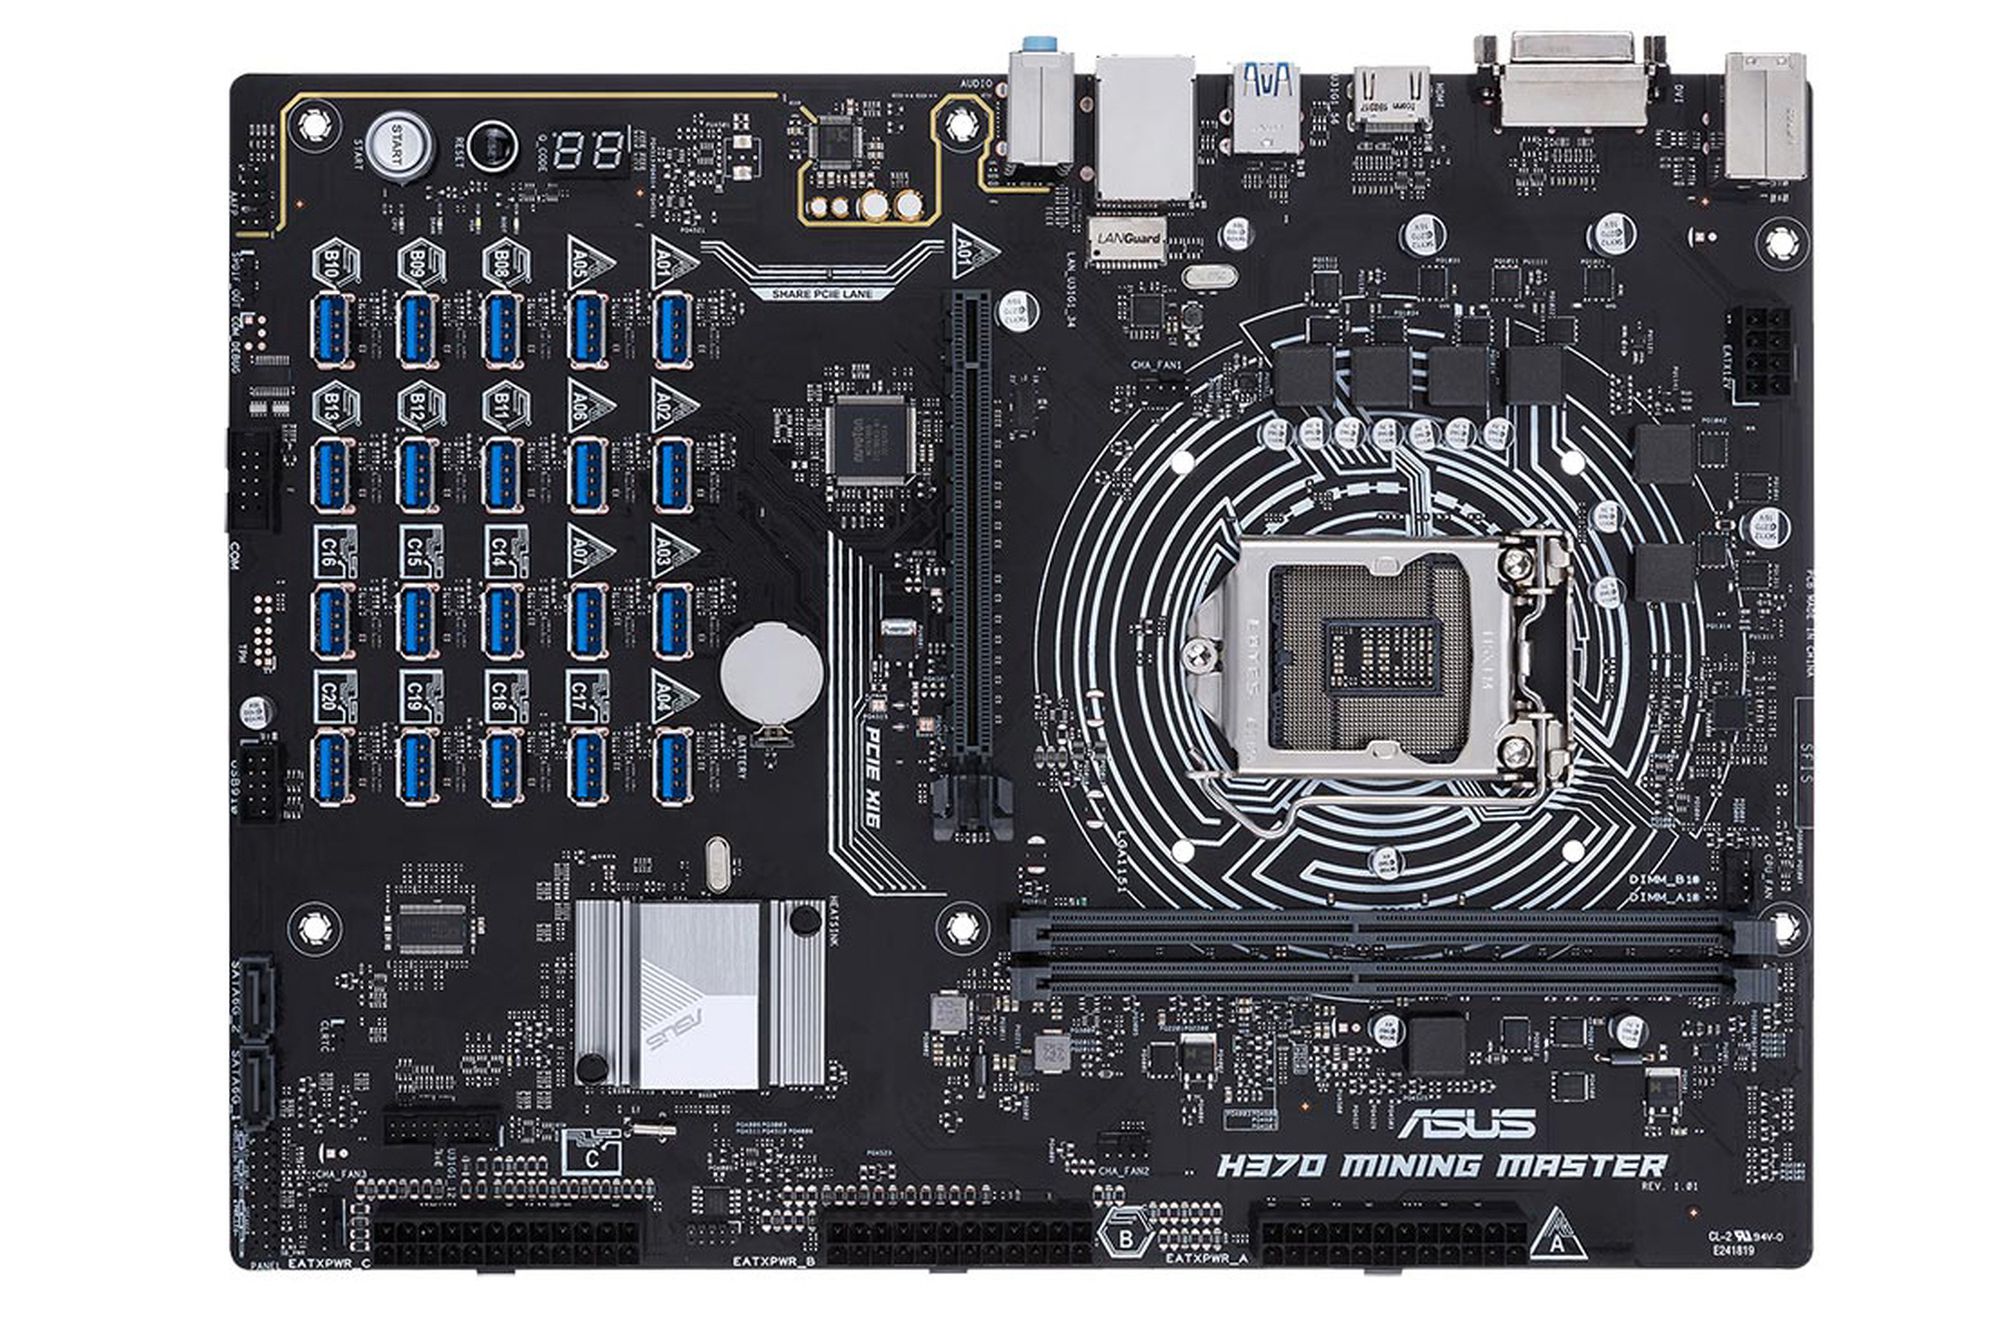 ASUS Announces H Mining Master: One Motherboard, 20 GPUs